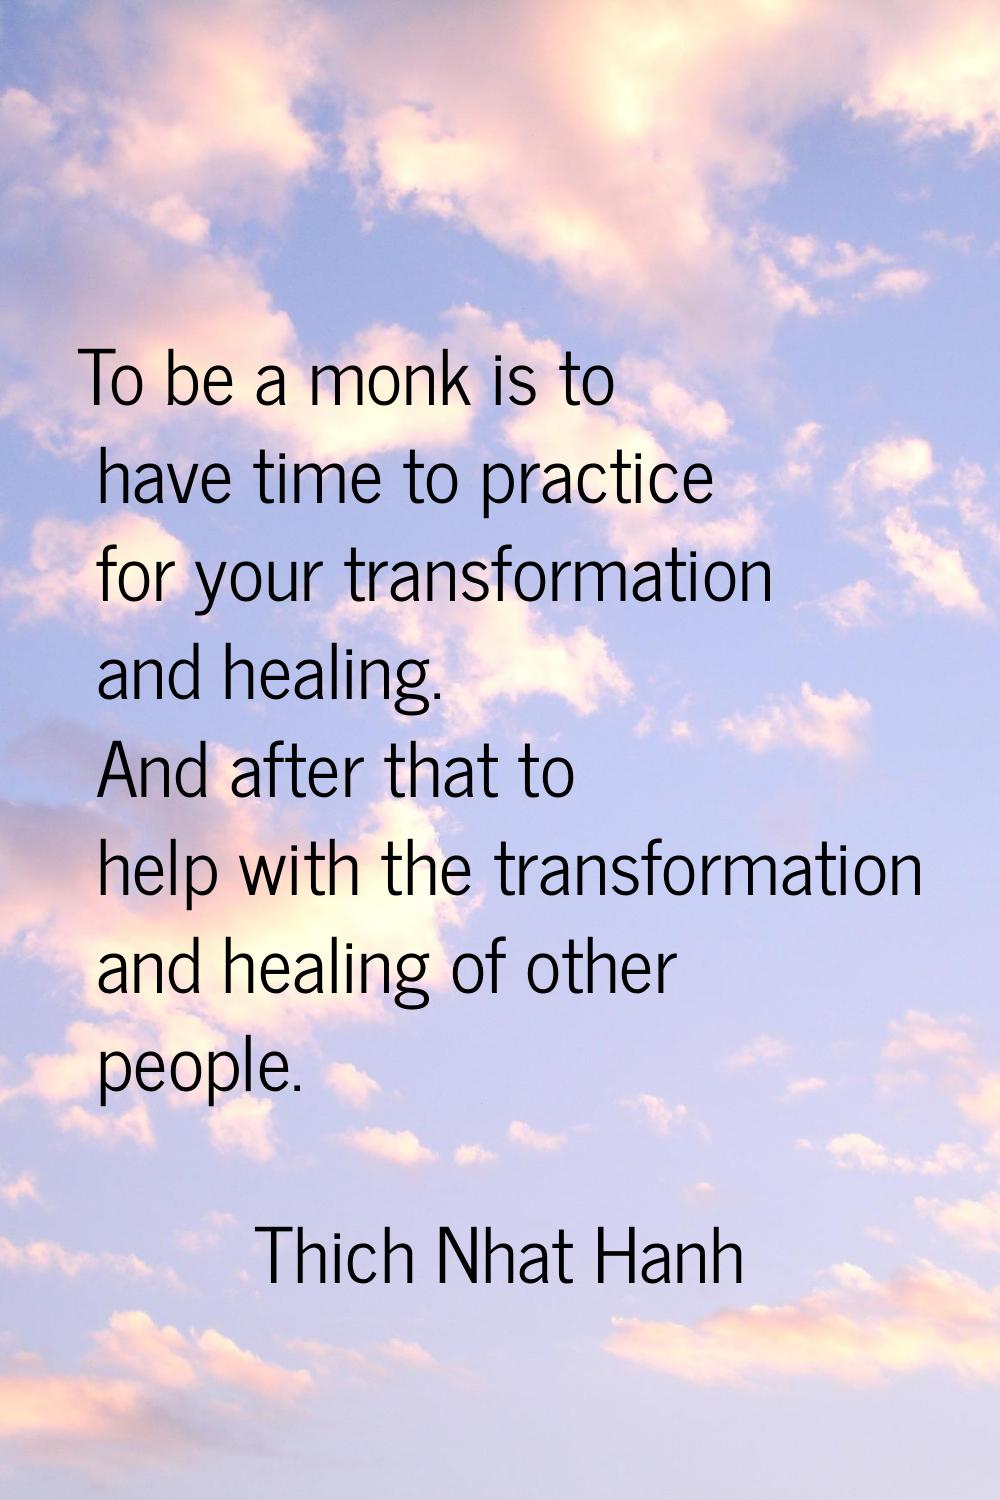 To be a monk is to have time to practice for your transformation and healing. And after that to hel